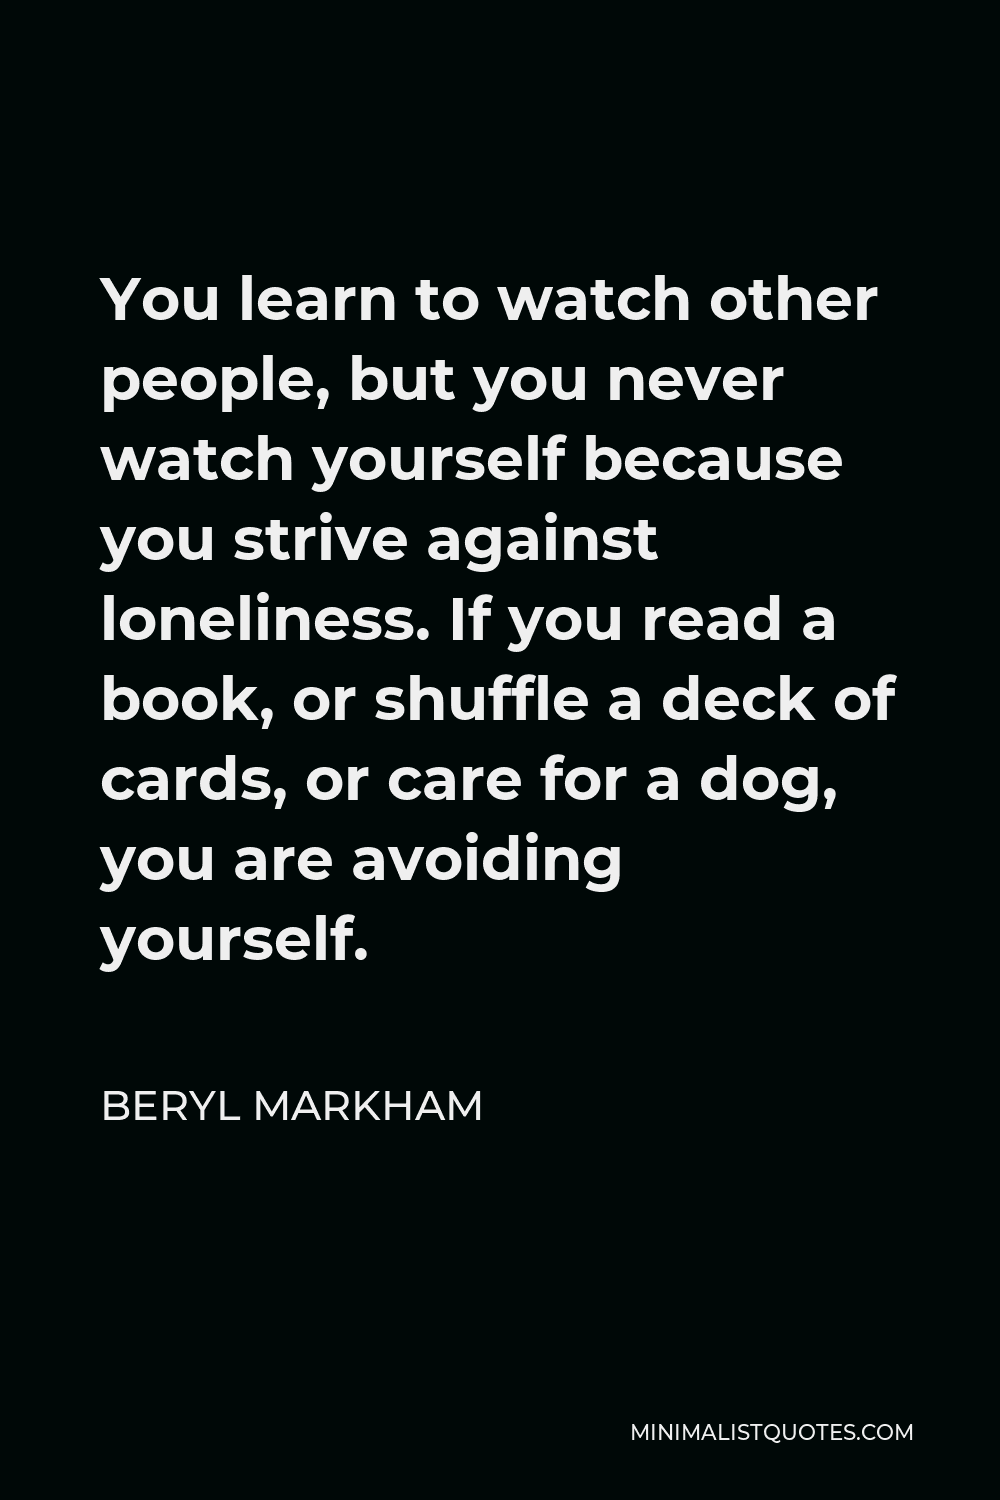 Beryl Markham Quote - You learn to watch other people, but you never watch yourself because you strive against loneliness. If you read a book, or shuffle a deck of cards, or care for a dog, you are avoiding yourself.